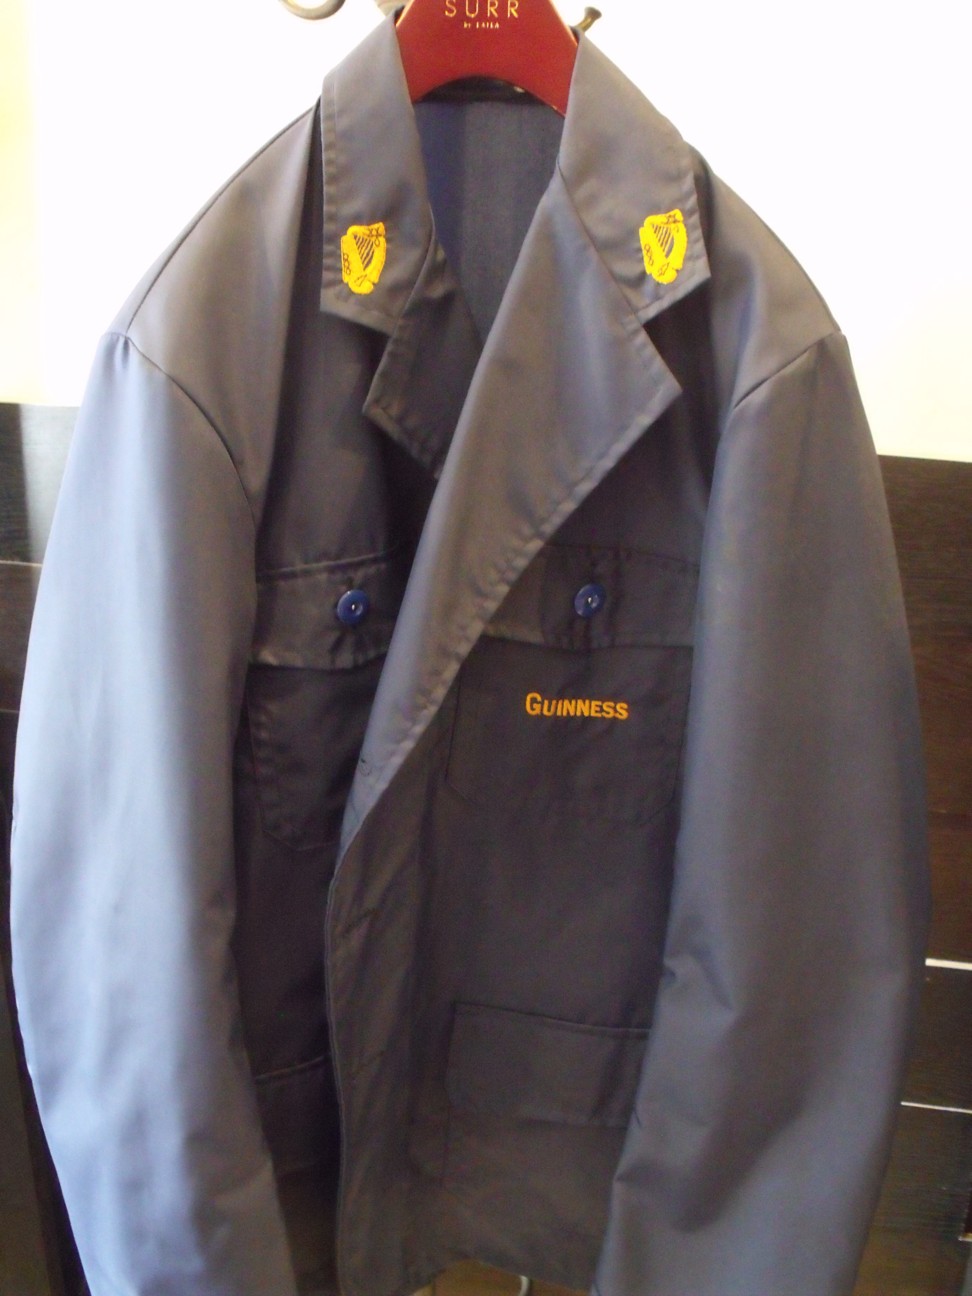 A workman’s jacket from the Guinness brewing company at Laila Tokio.